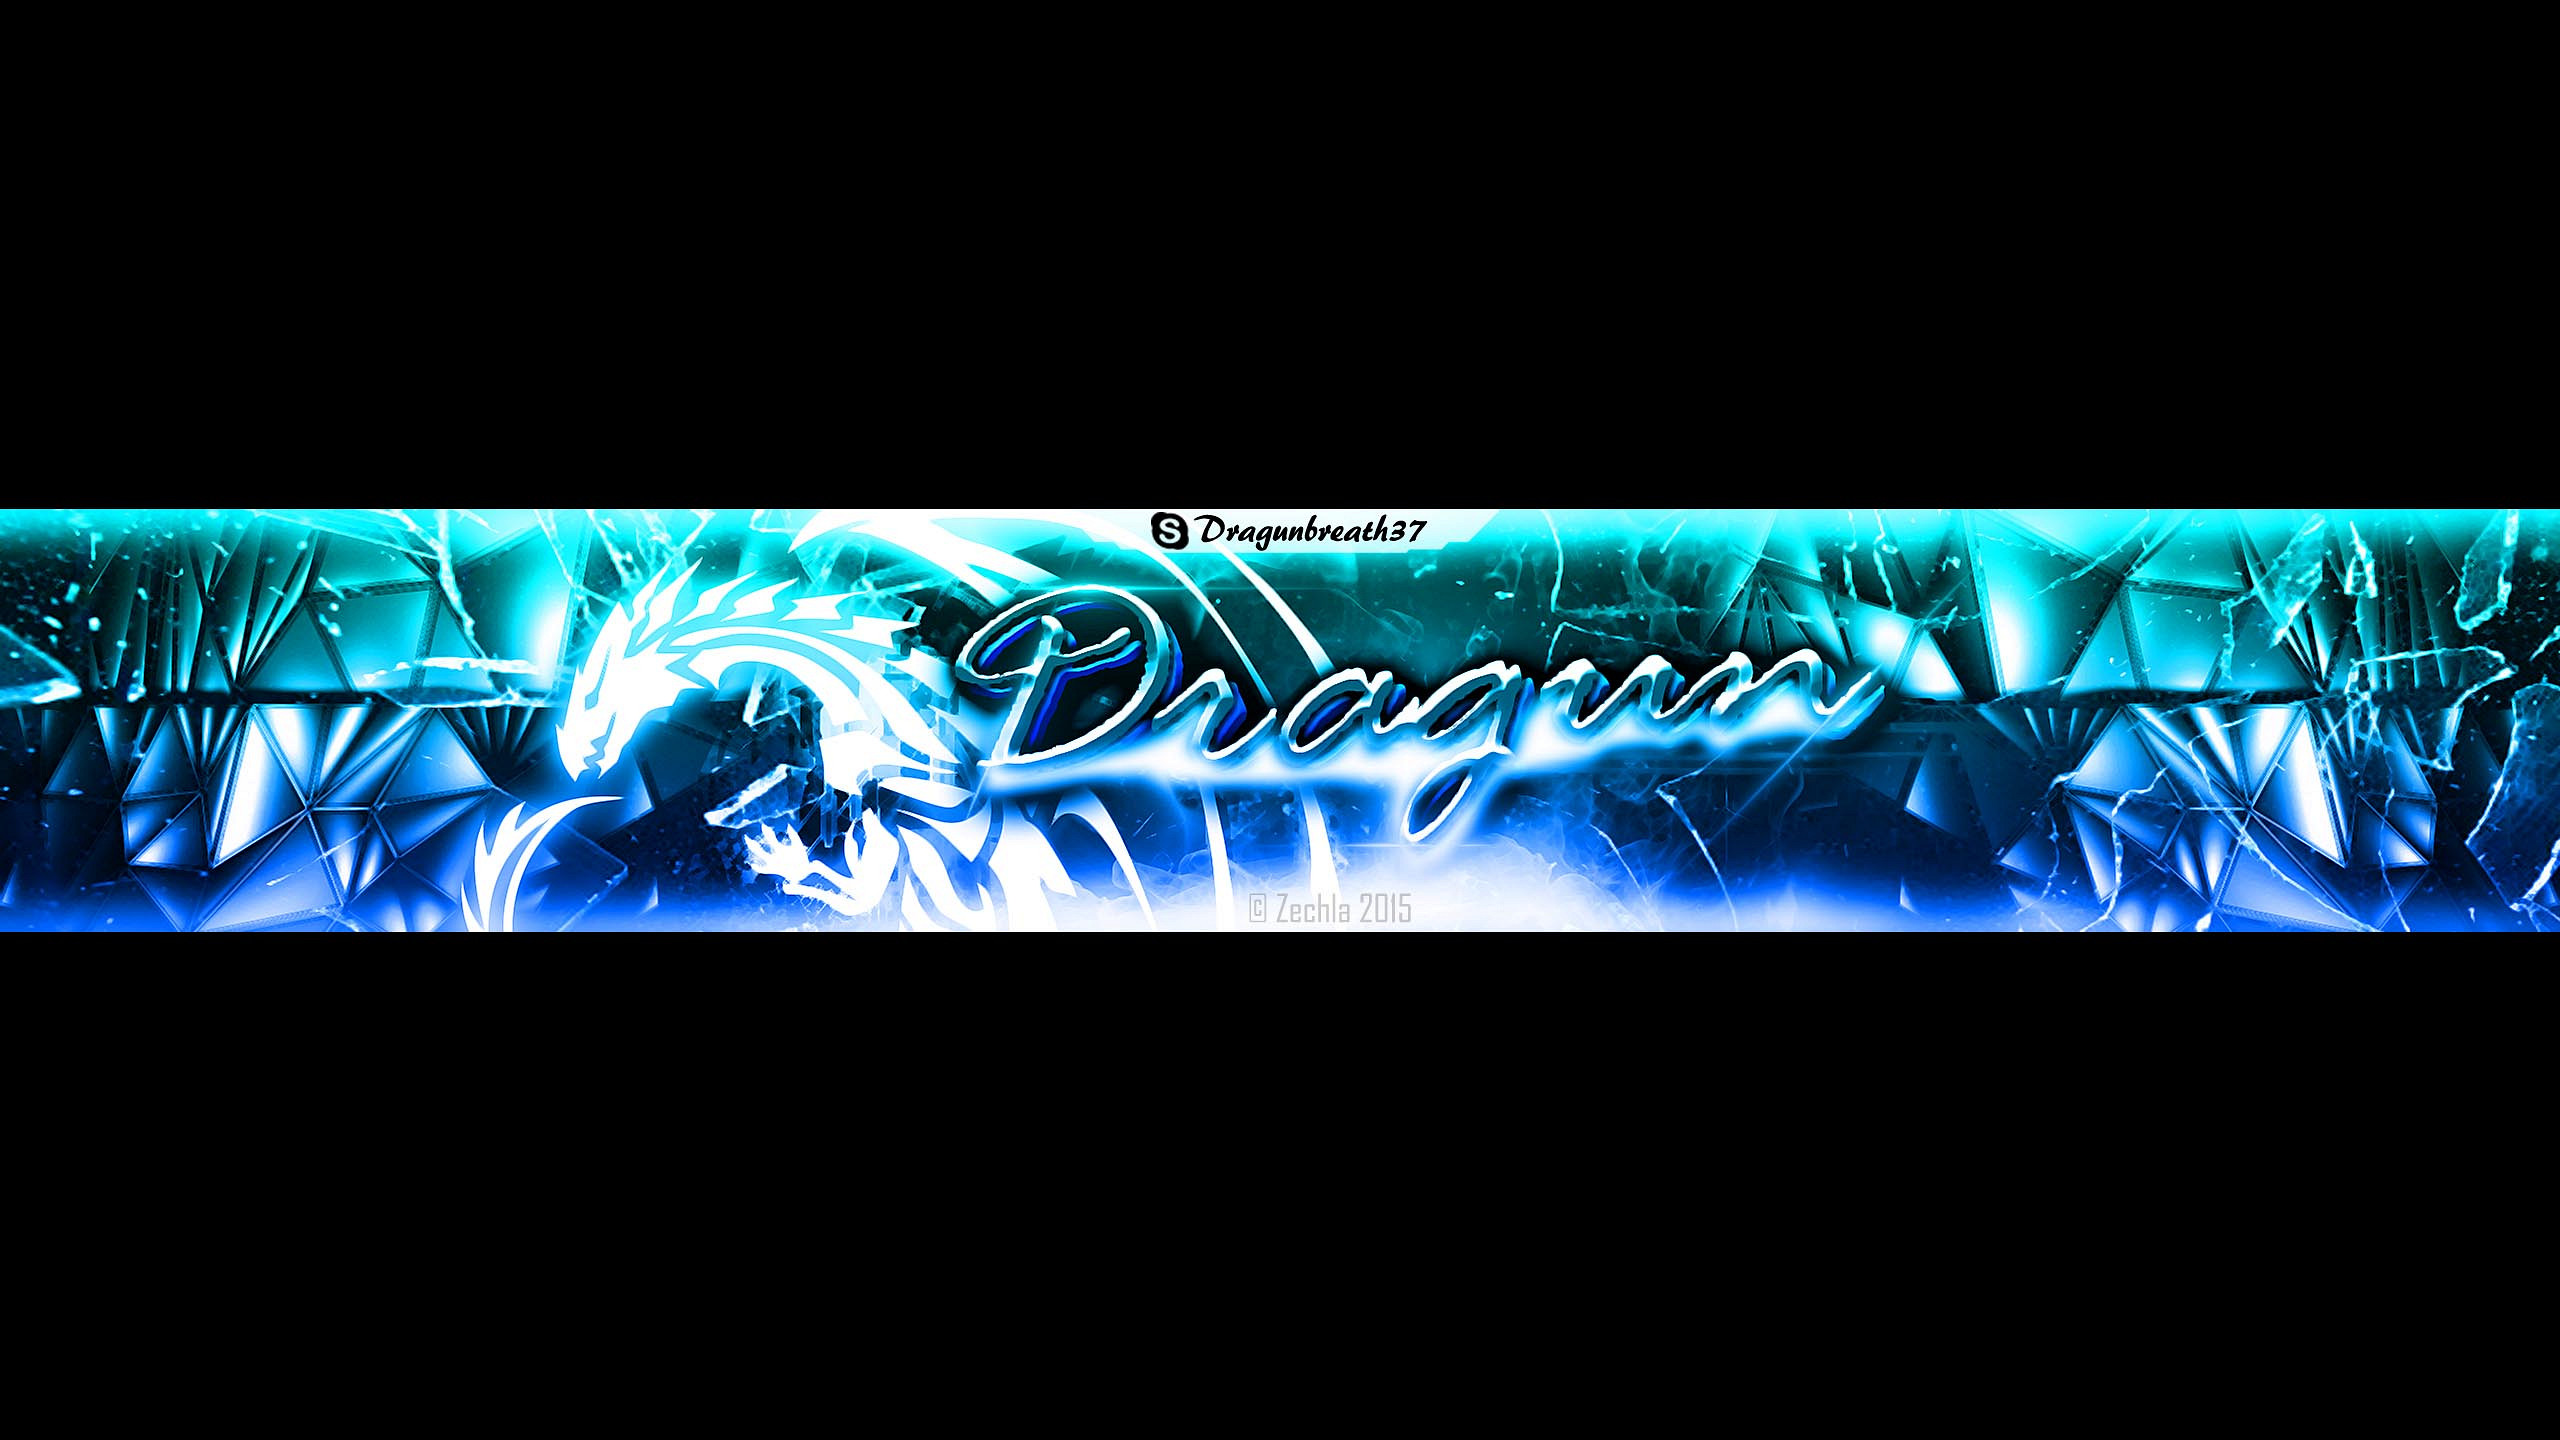 _geometry_dash__thedragunbreath_s_youtube_banner_by_zechla d93dcnu